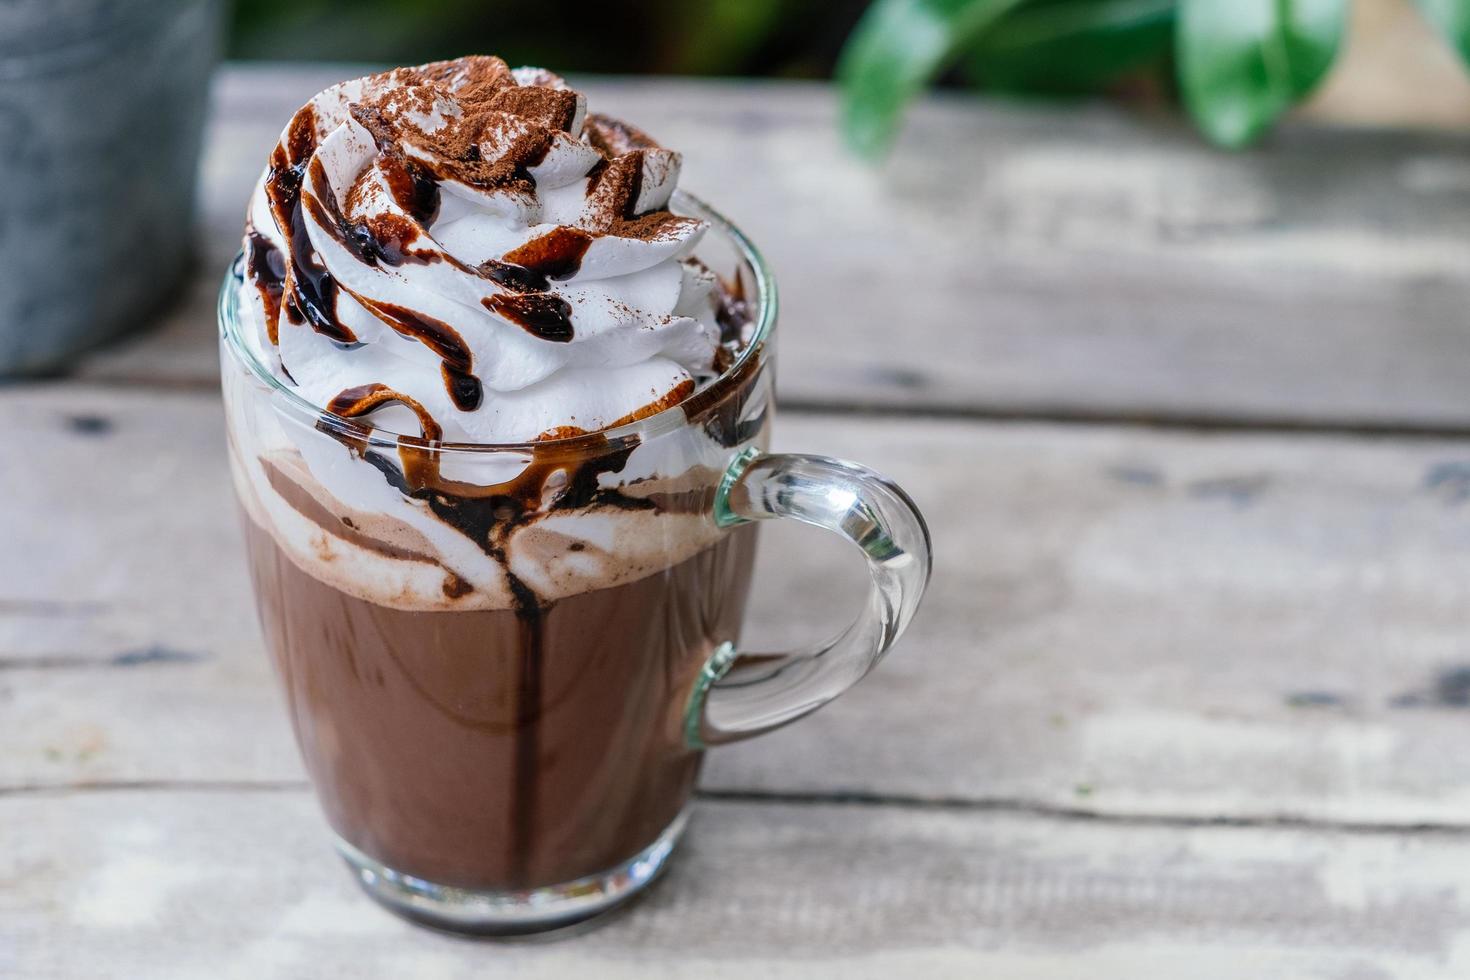 Hot chocolate cocoa in glass mug with whipped cream photo